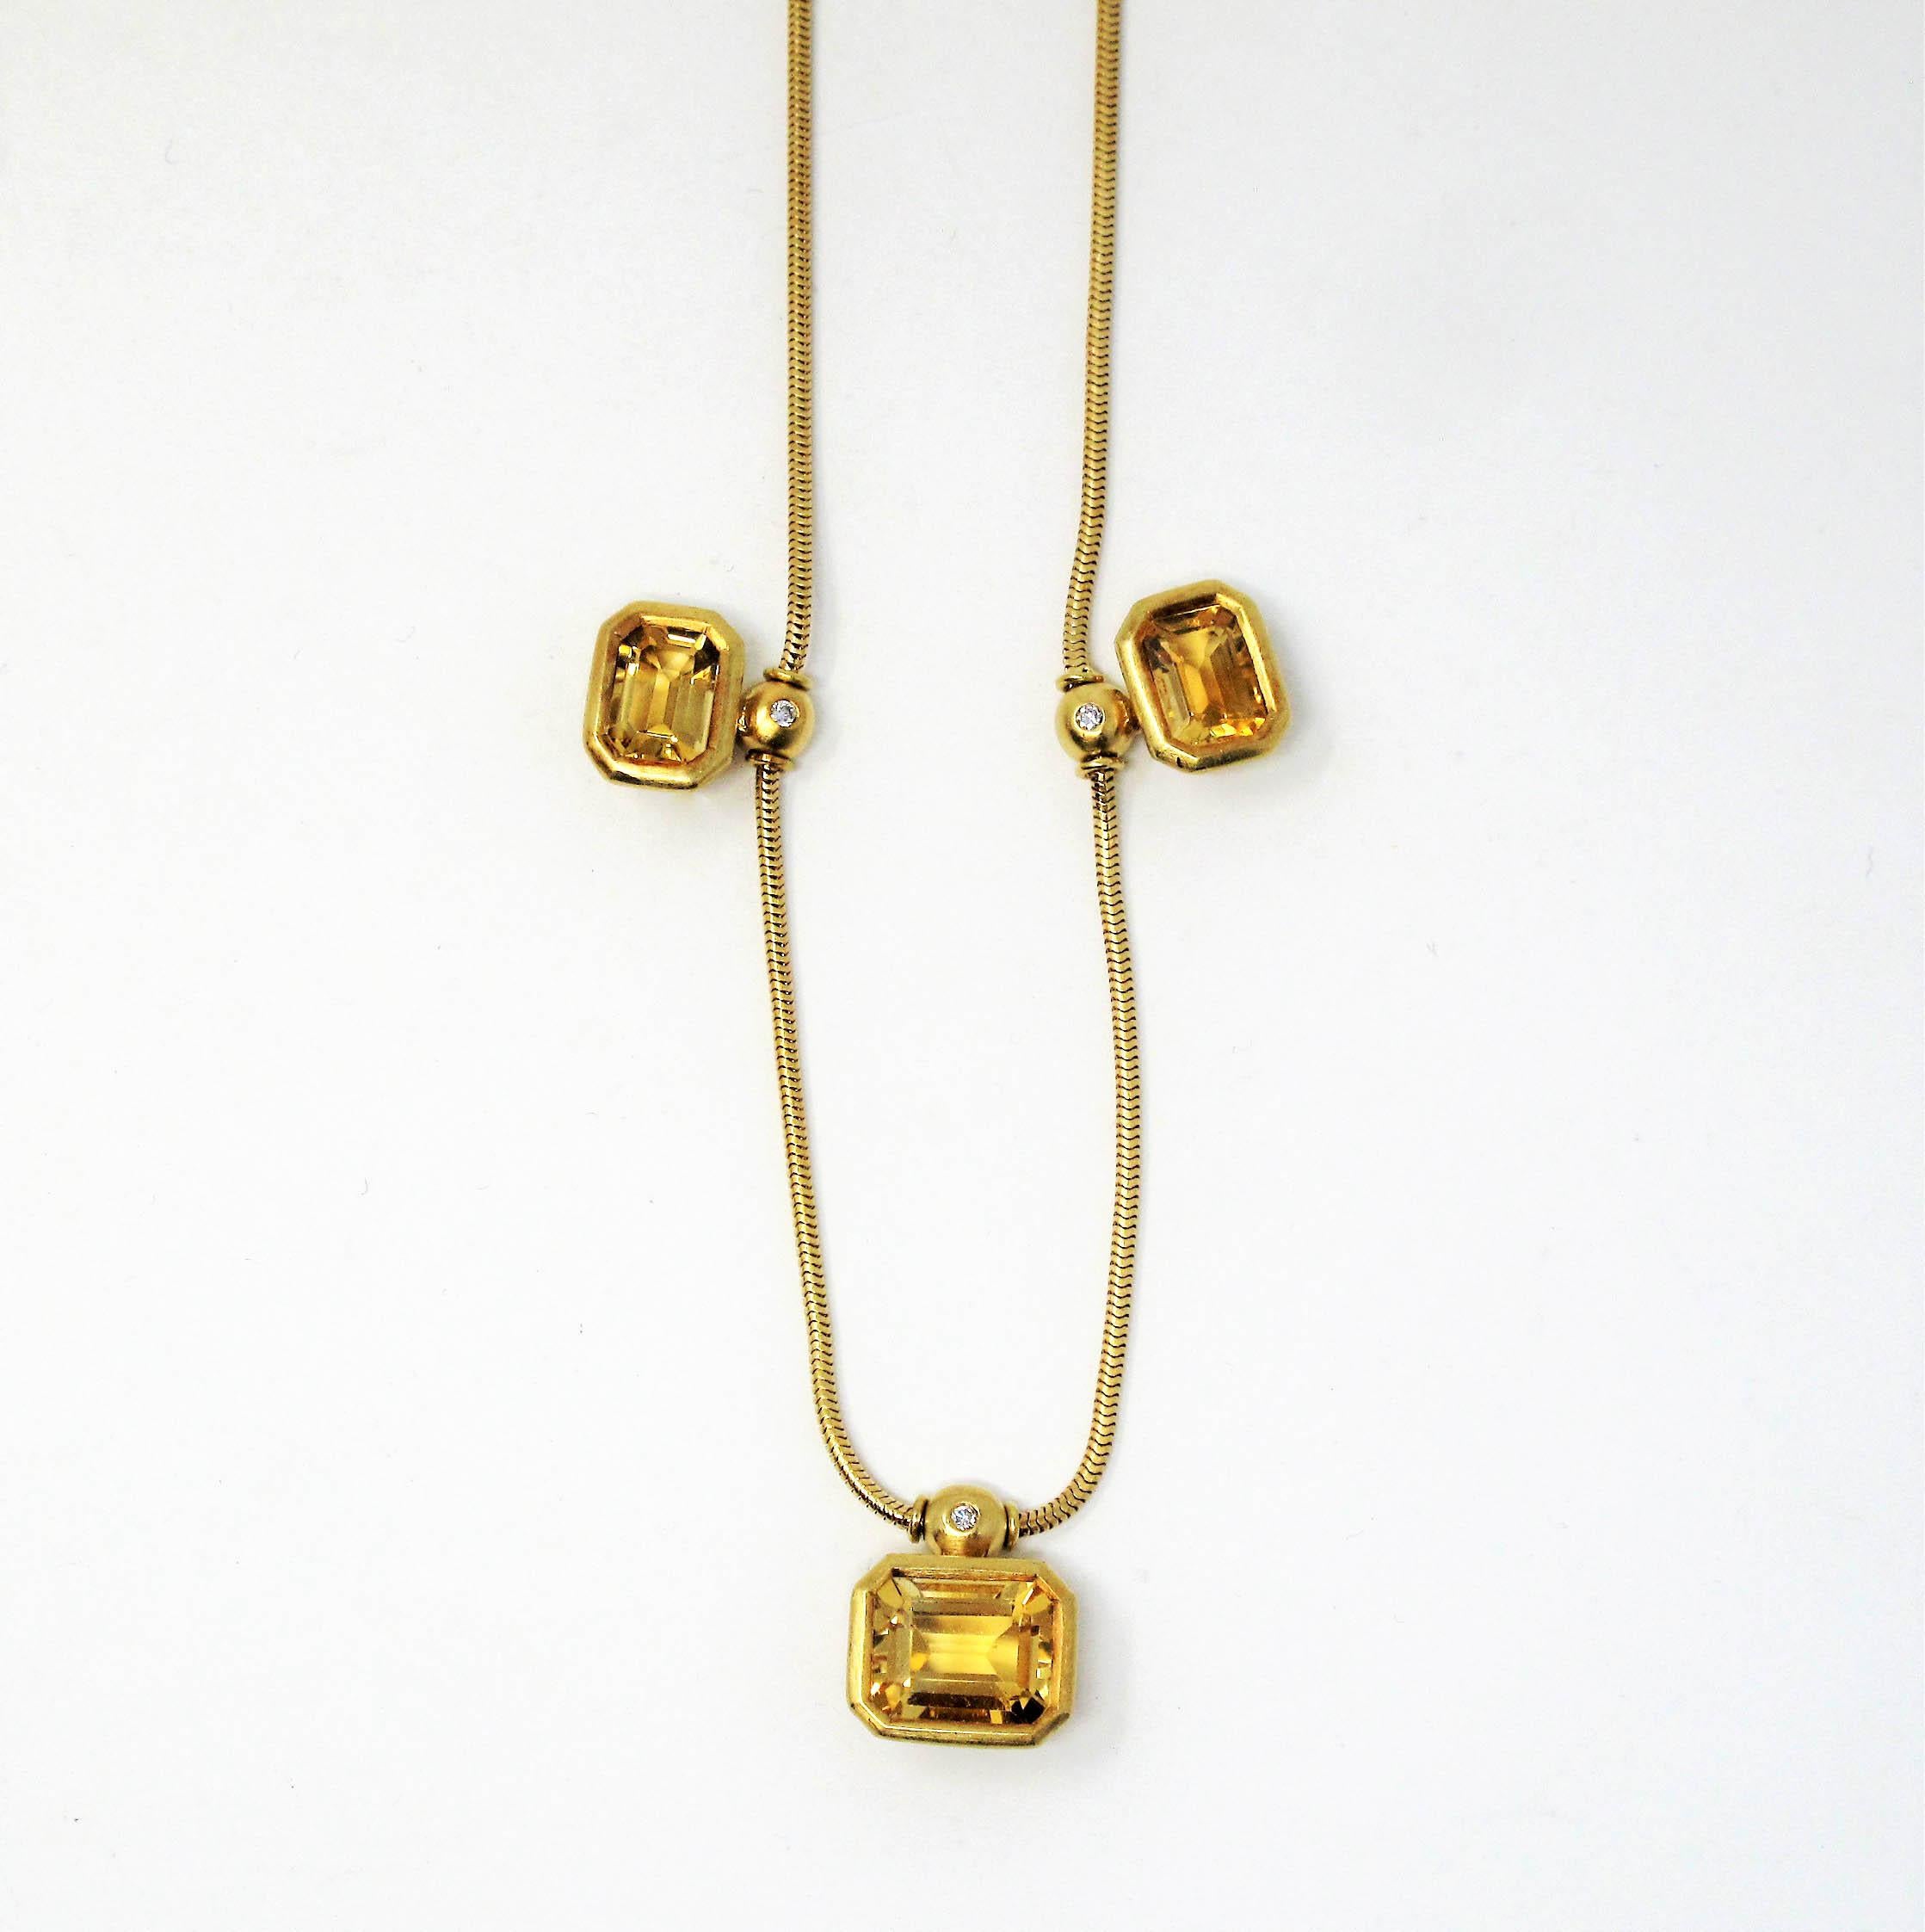 Emerald Cut Citrine and Diamond Three Station Snake Chain Necklace 18 Karat Gold In Good Condition For Sale In Scottsdale, AZ